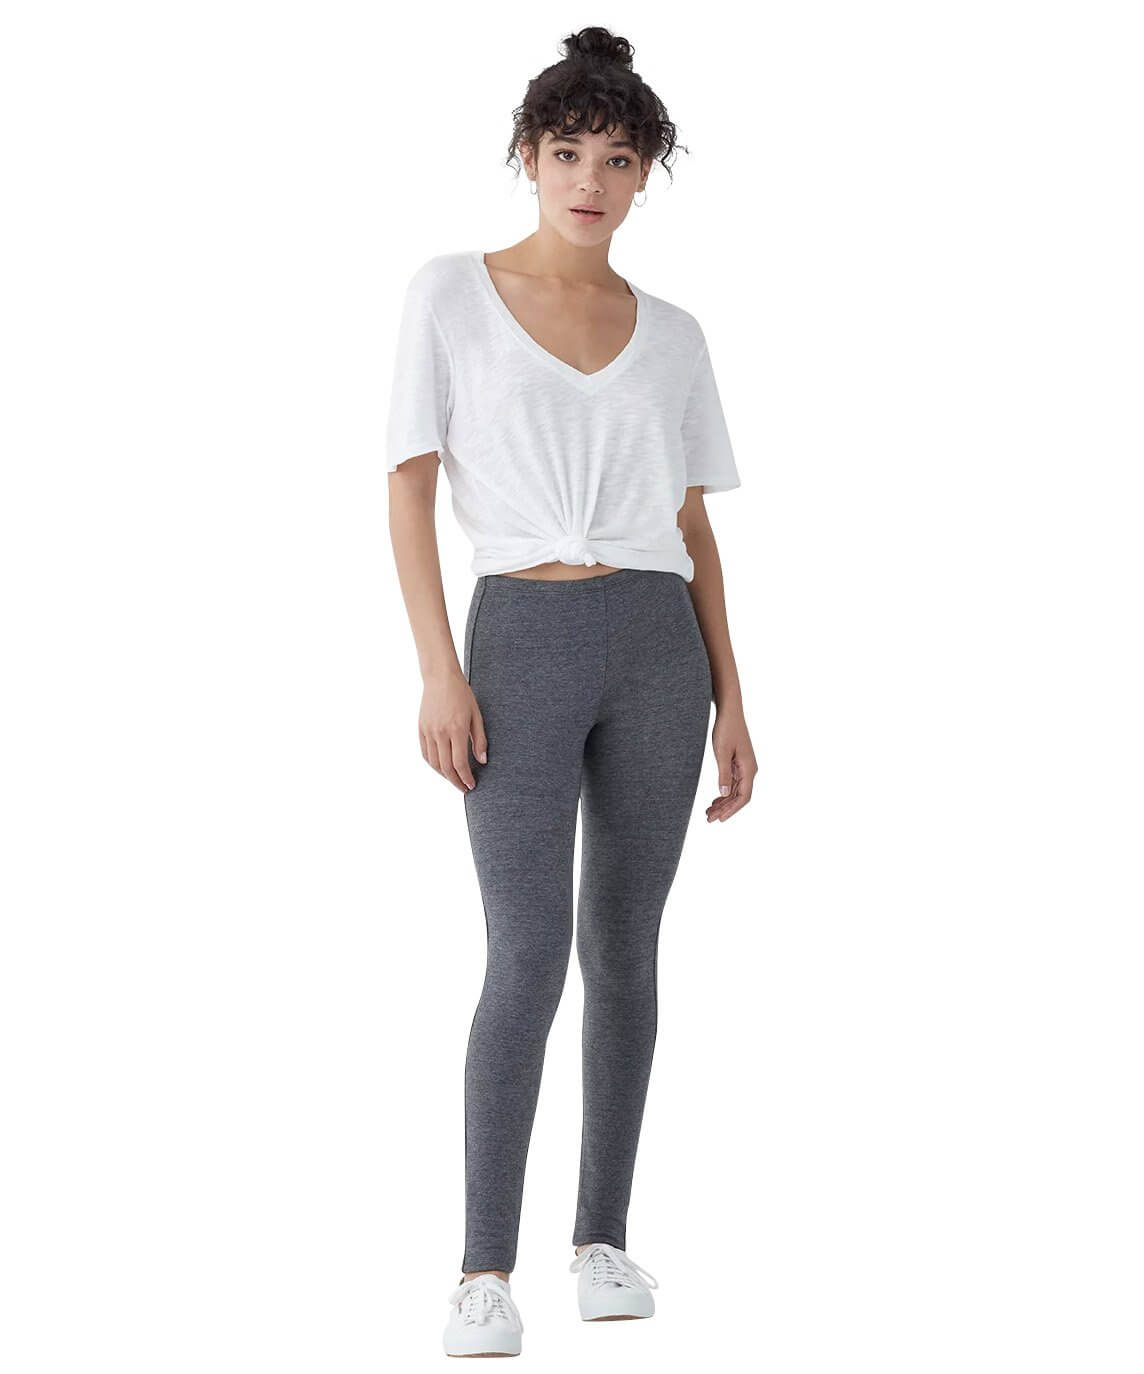 French Terry Legging, Grey – PINK ARROWS